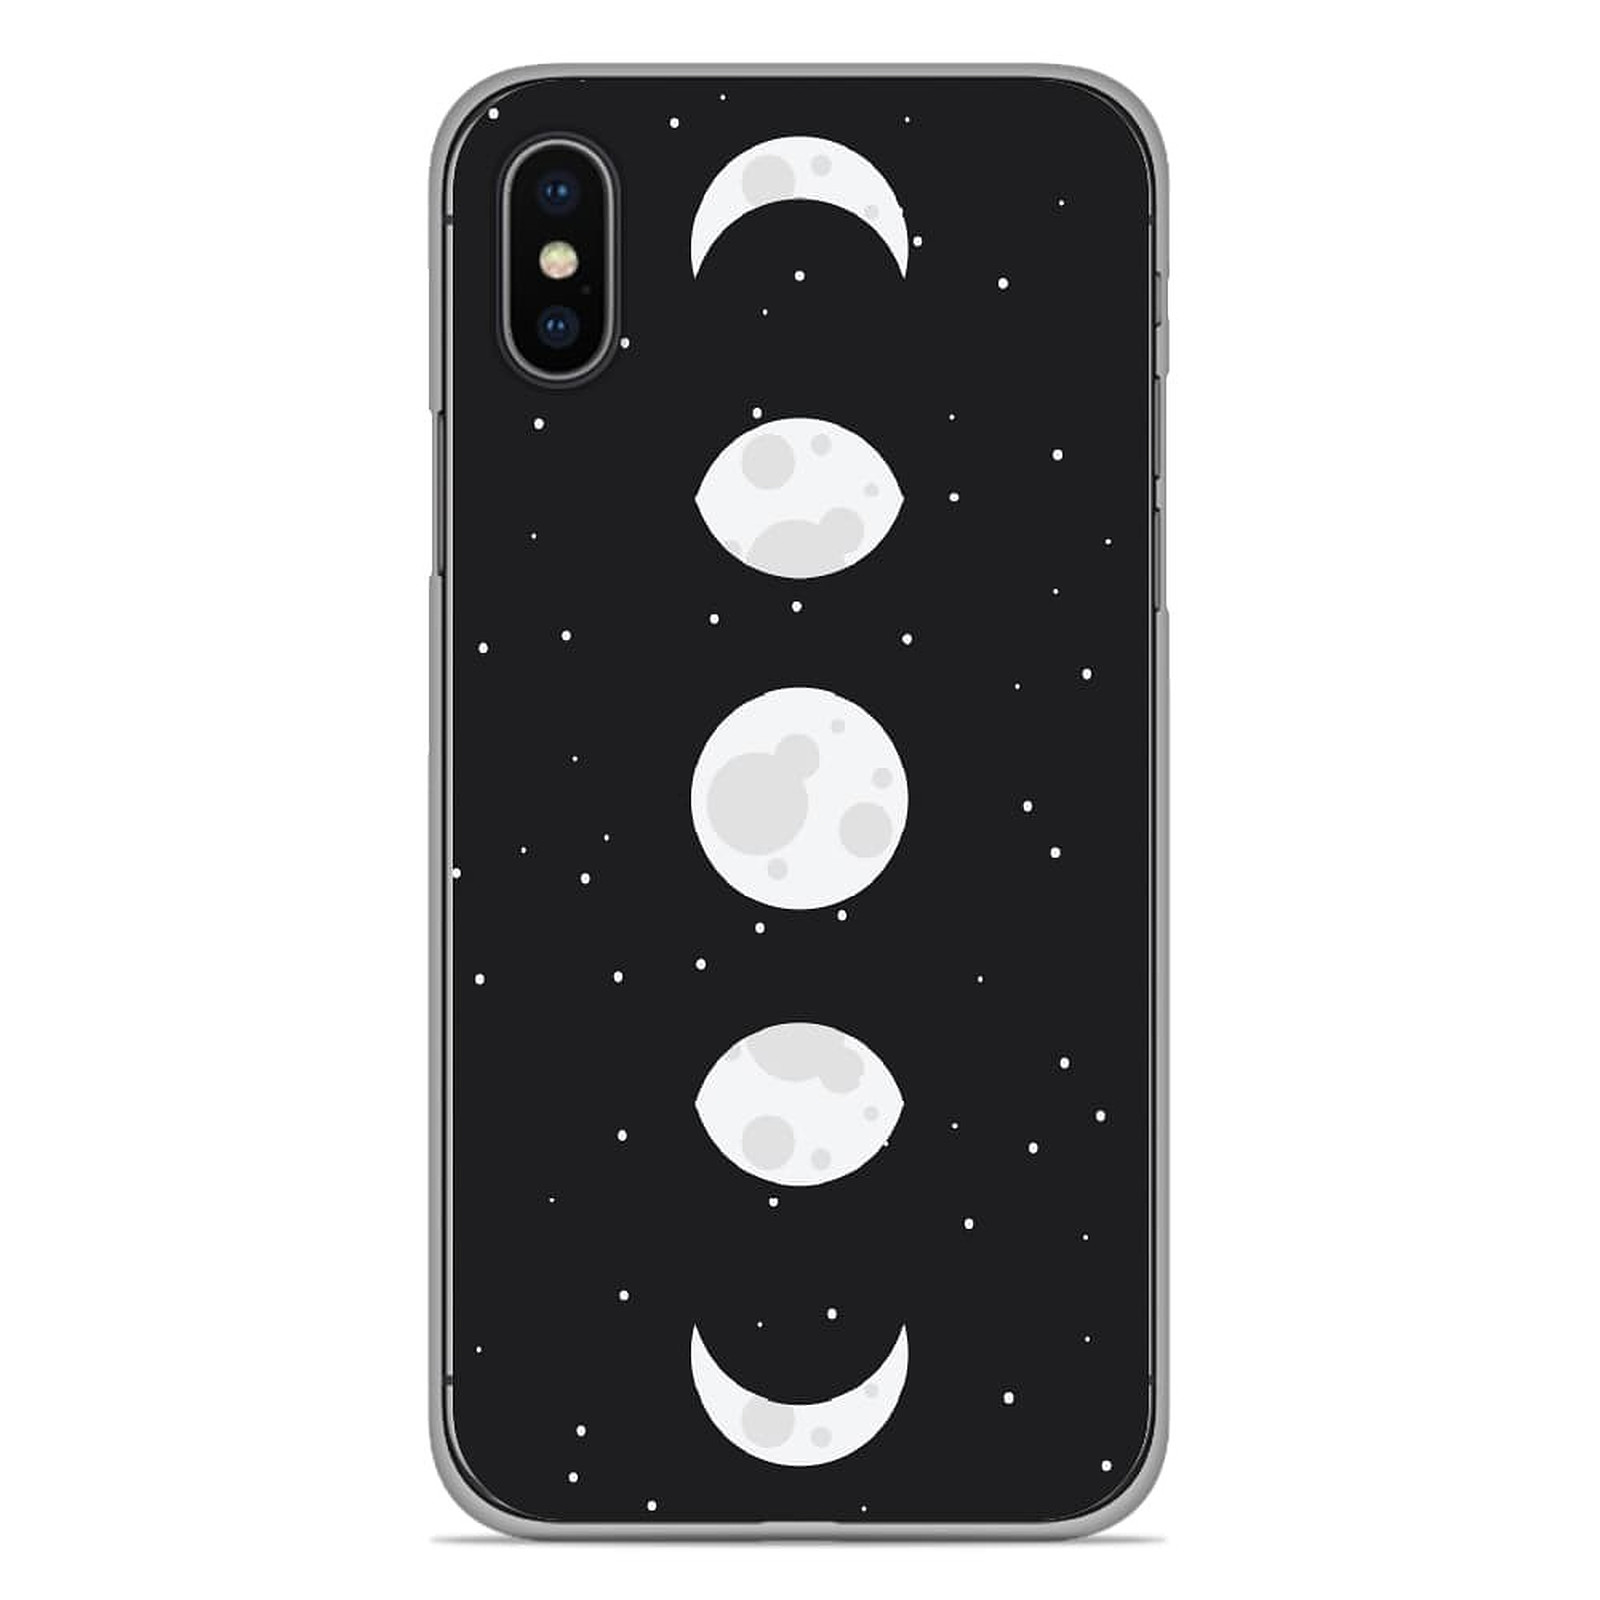 1001 Coques Coque silicone gel Apple iPhone X / XS motif Phase de Lune - Coque telephone 1001Coques